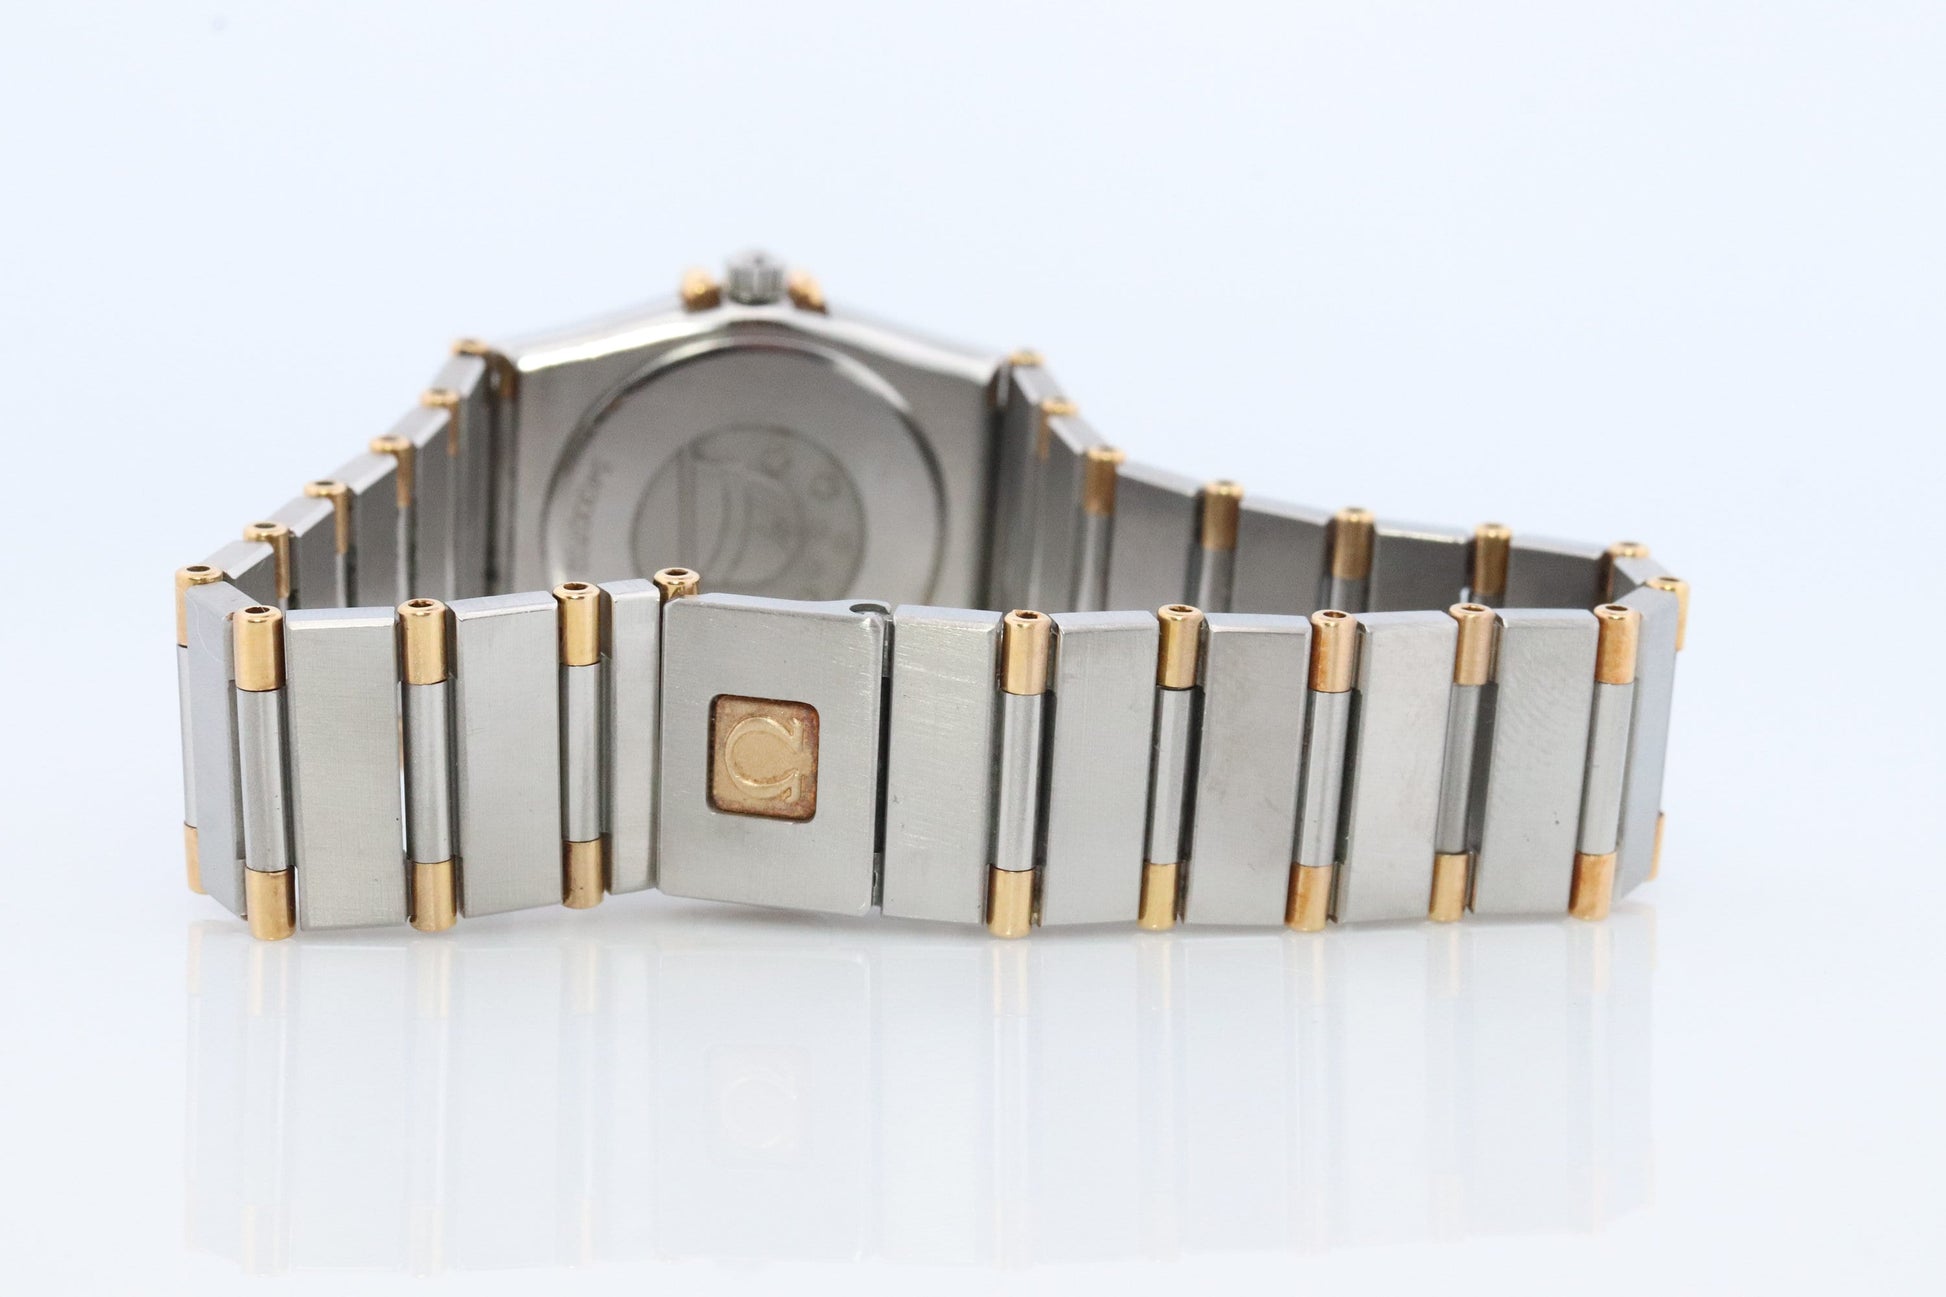 Omega Watch. Authentic Ladies Omega Constellation Wristwatch. Womens Reference 1370.1 or 13701000. Box and Papers